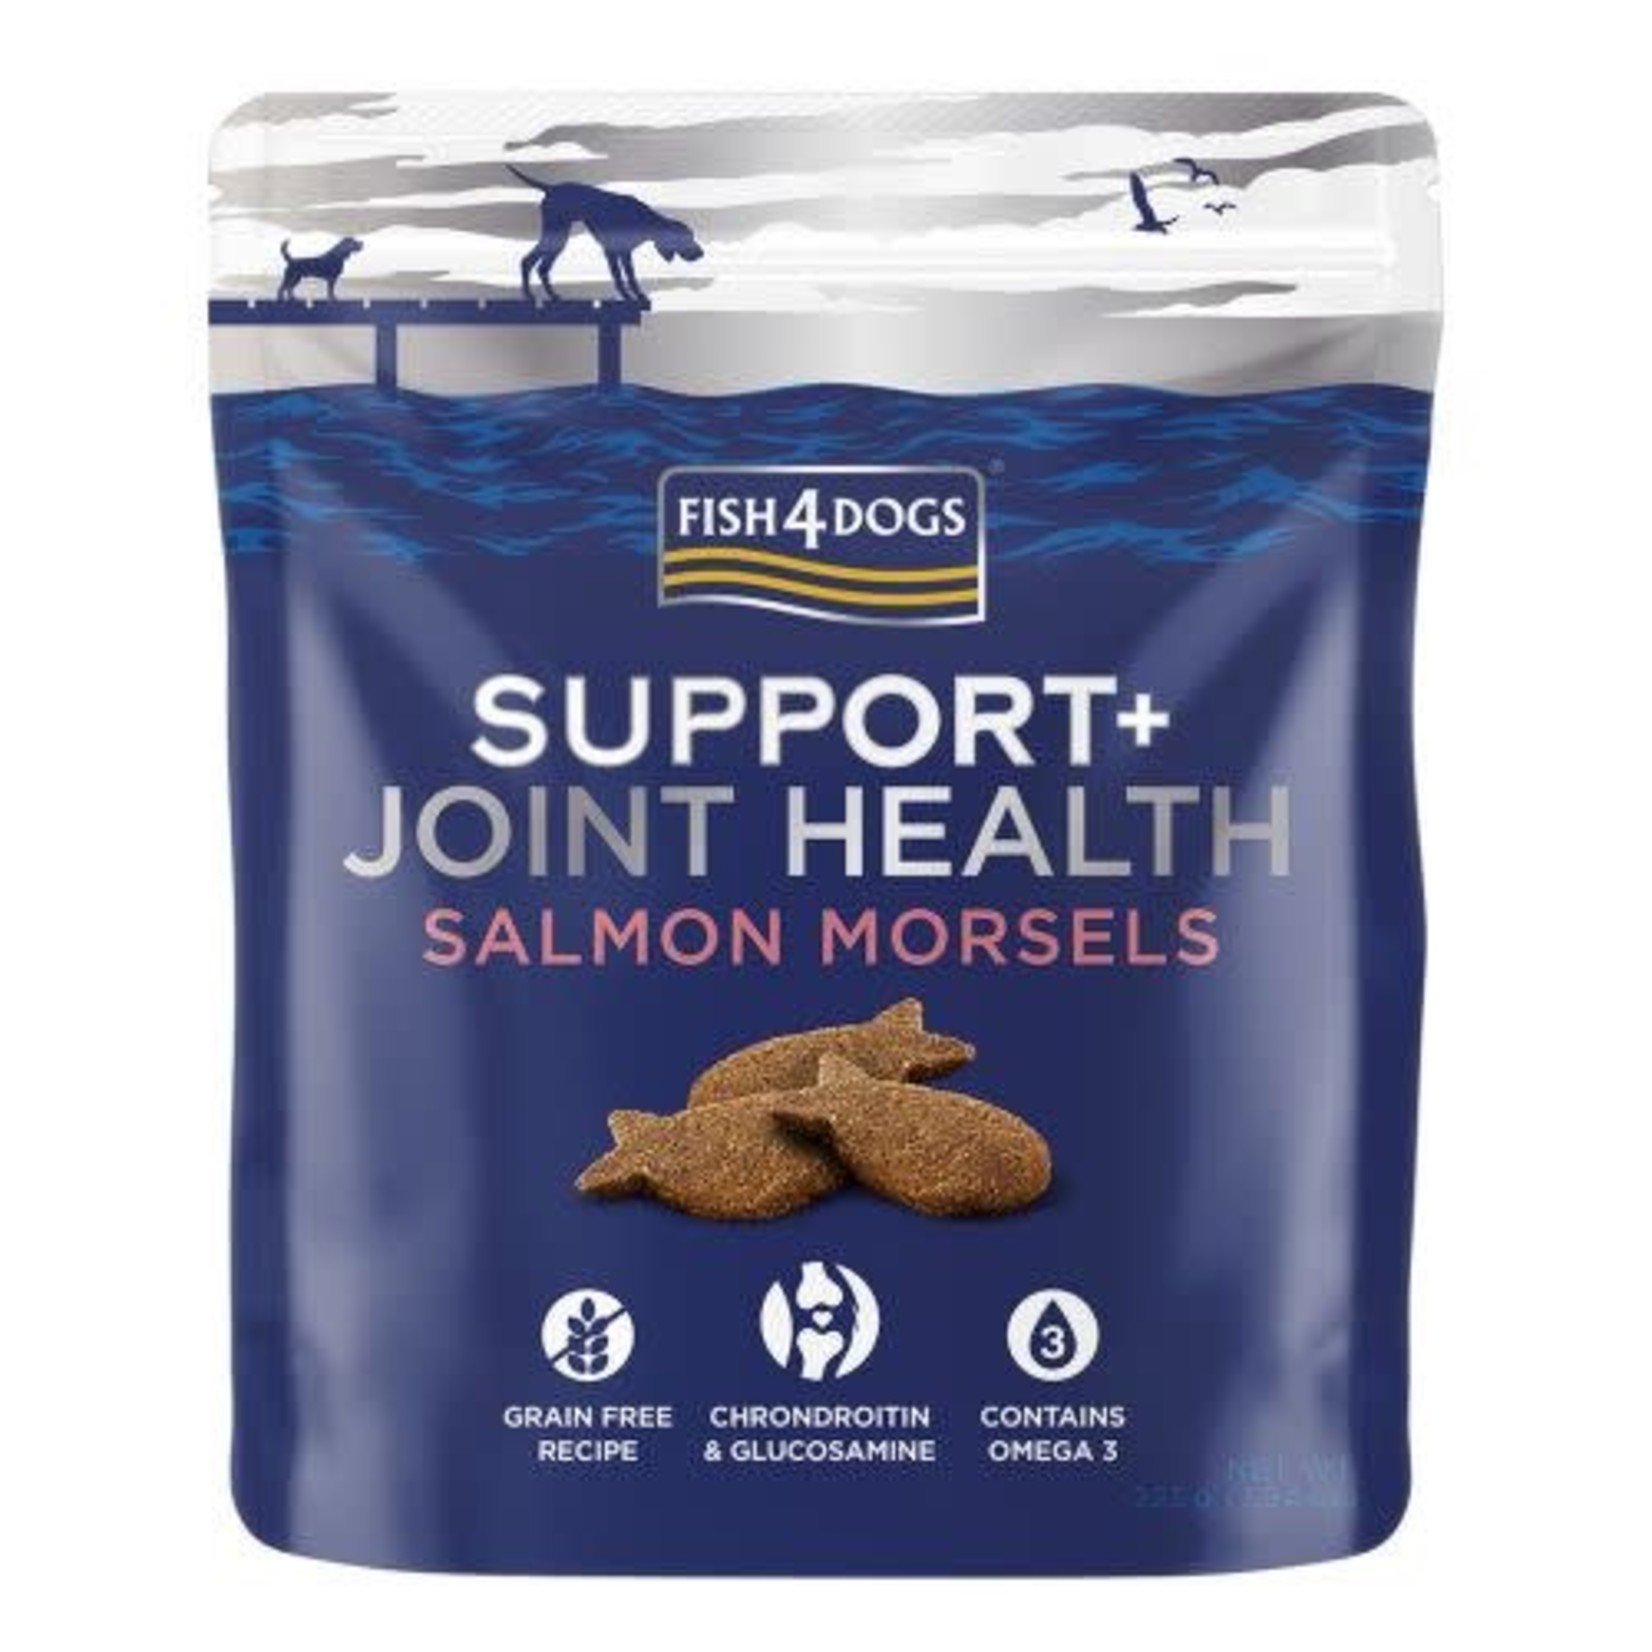 Fish4Dogs Support+ Joint Health Salmon Morsels Dog Treats, 225g